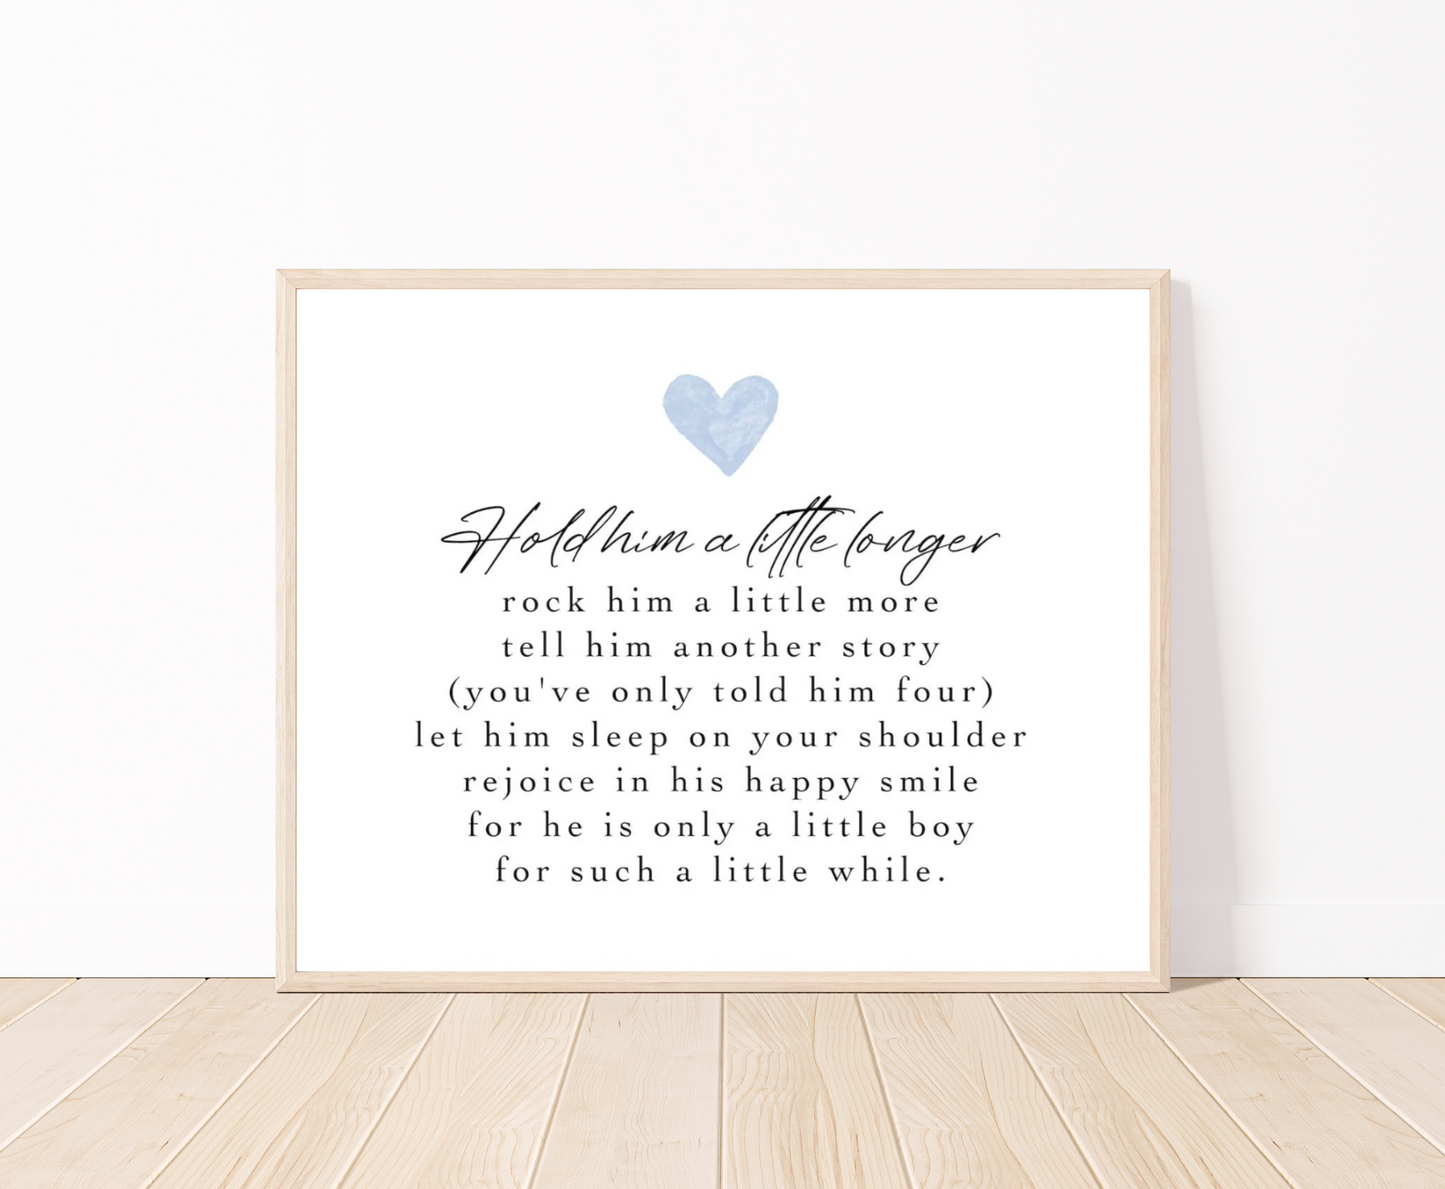 A digital poster that has a blue heart, and a piece of writing that says: Hold him a little longer, rock him a little more, tell him another story, (you have only told him four), let him sleep on your shoulder, rejoice in his happy smile, for he is only a little boy, for such a little while.